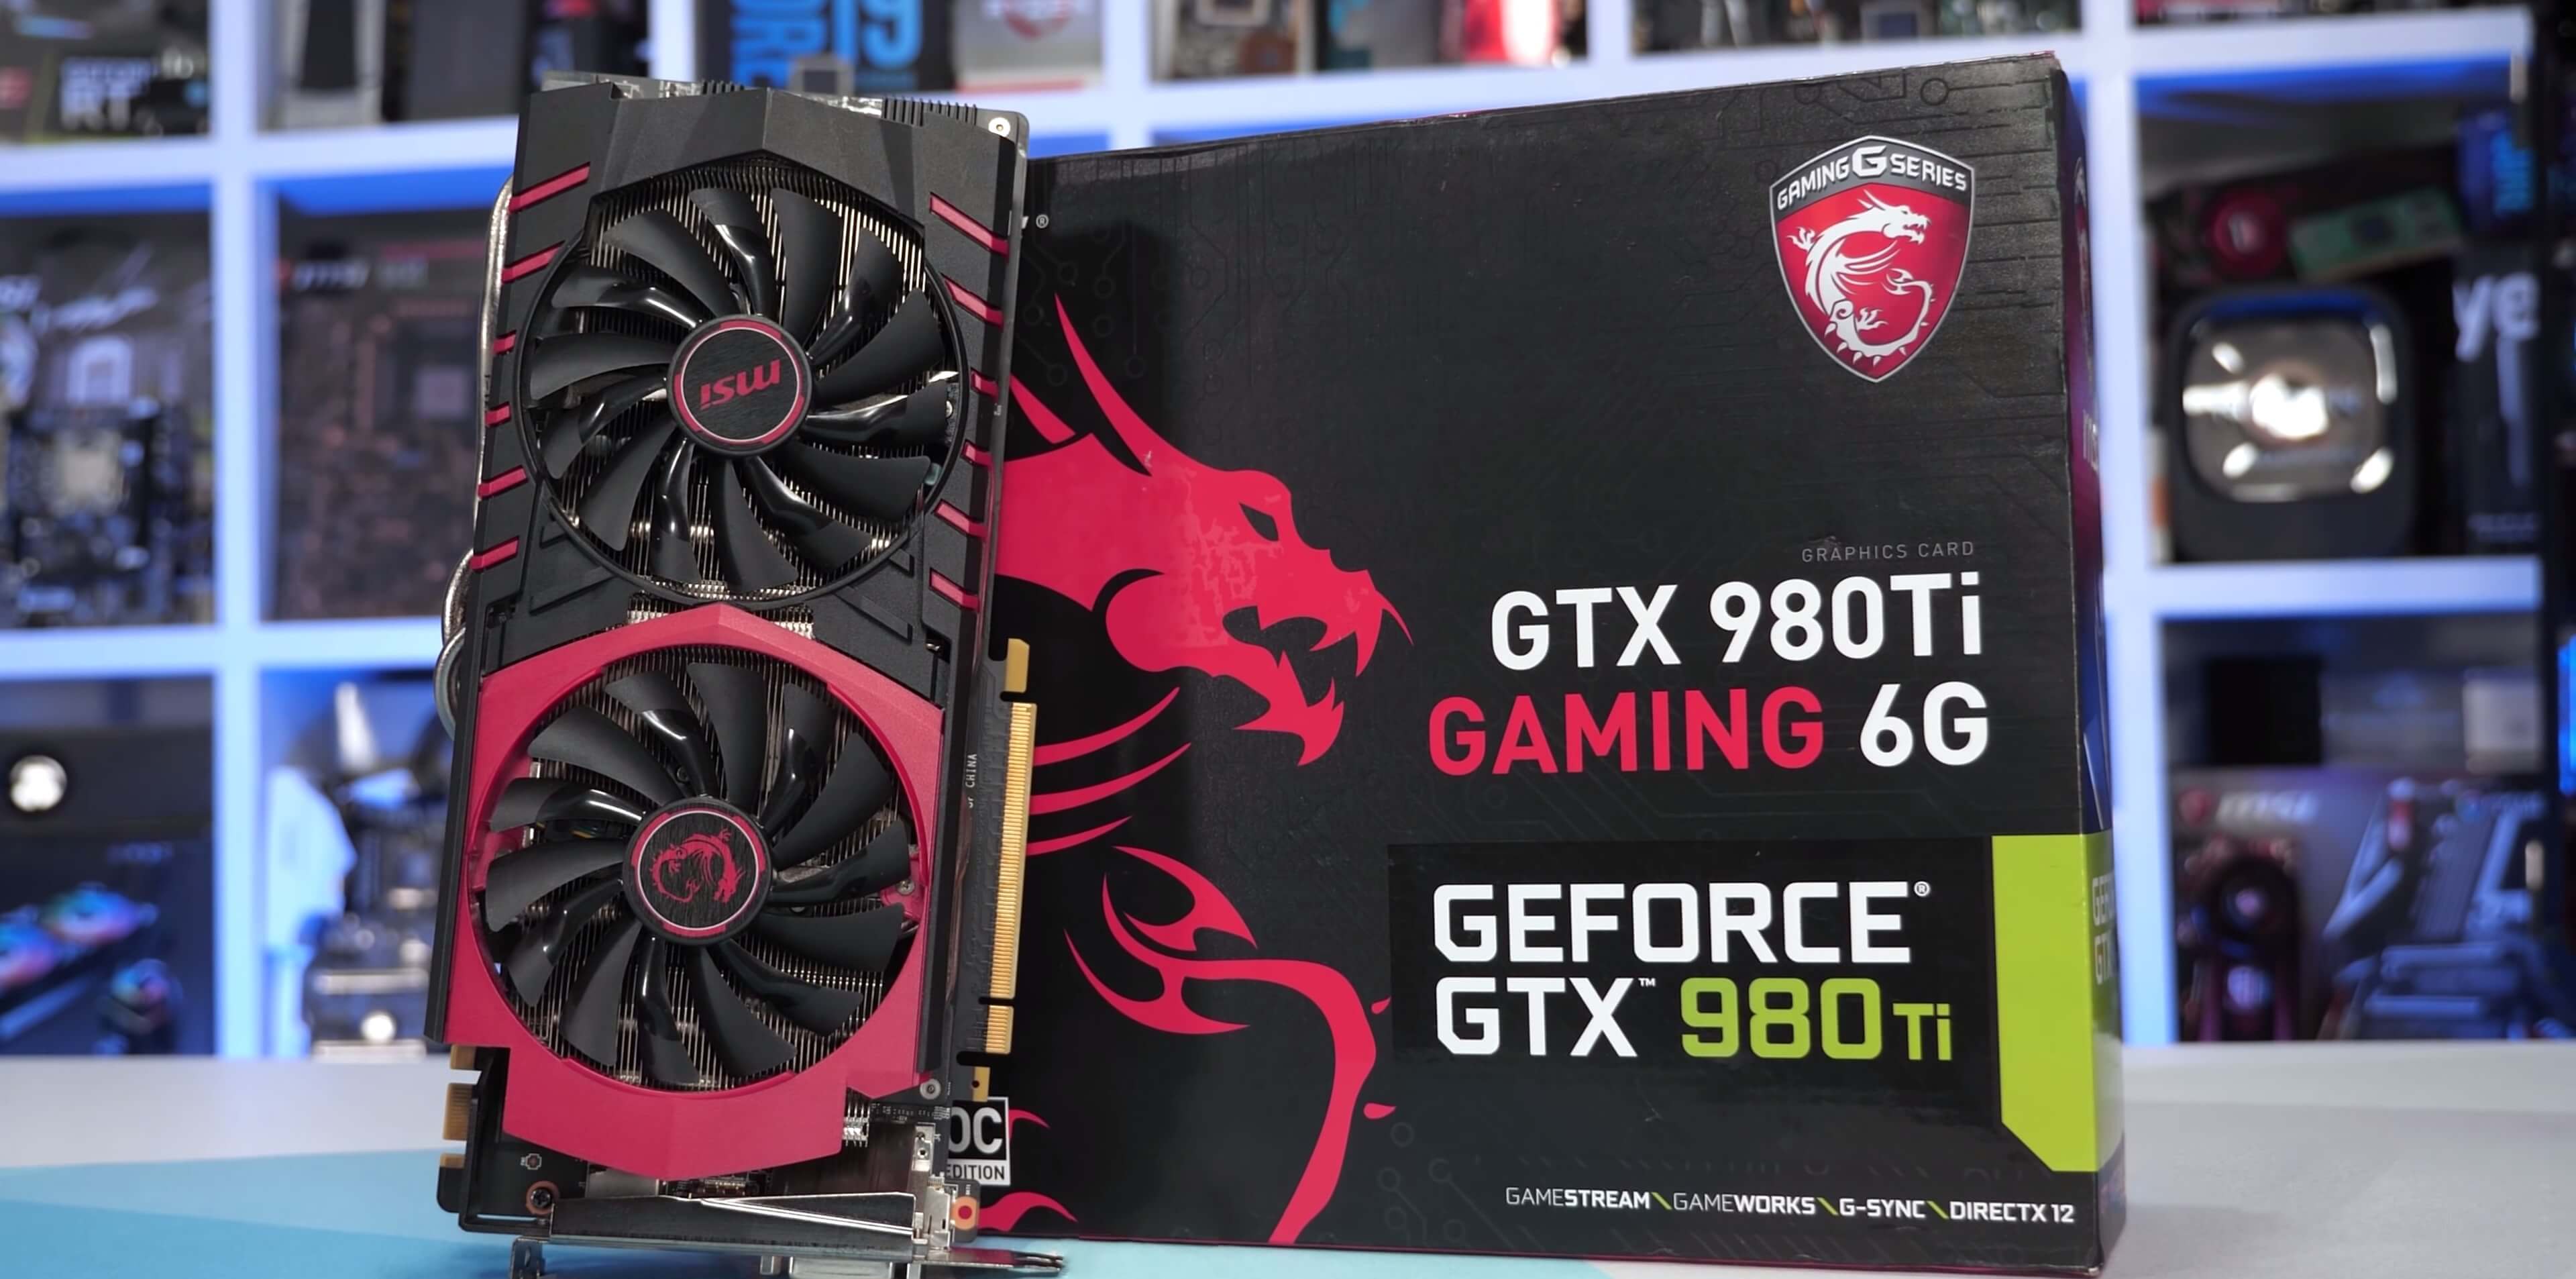 GeForce GTX 980 Ti Revisited How does it fare against the GTX 1070 and